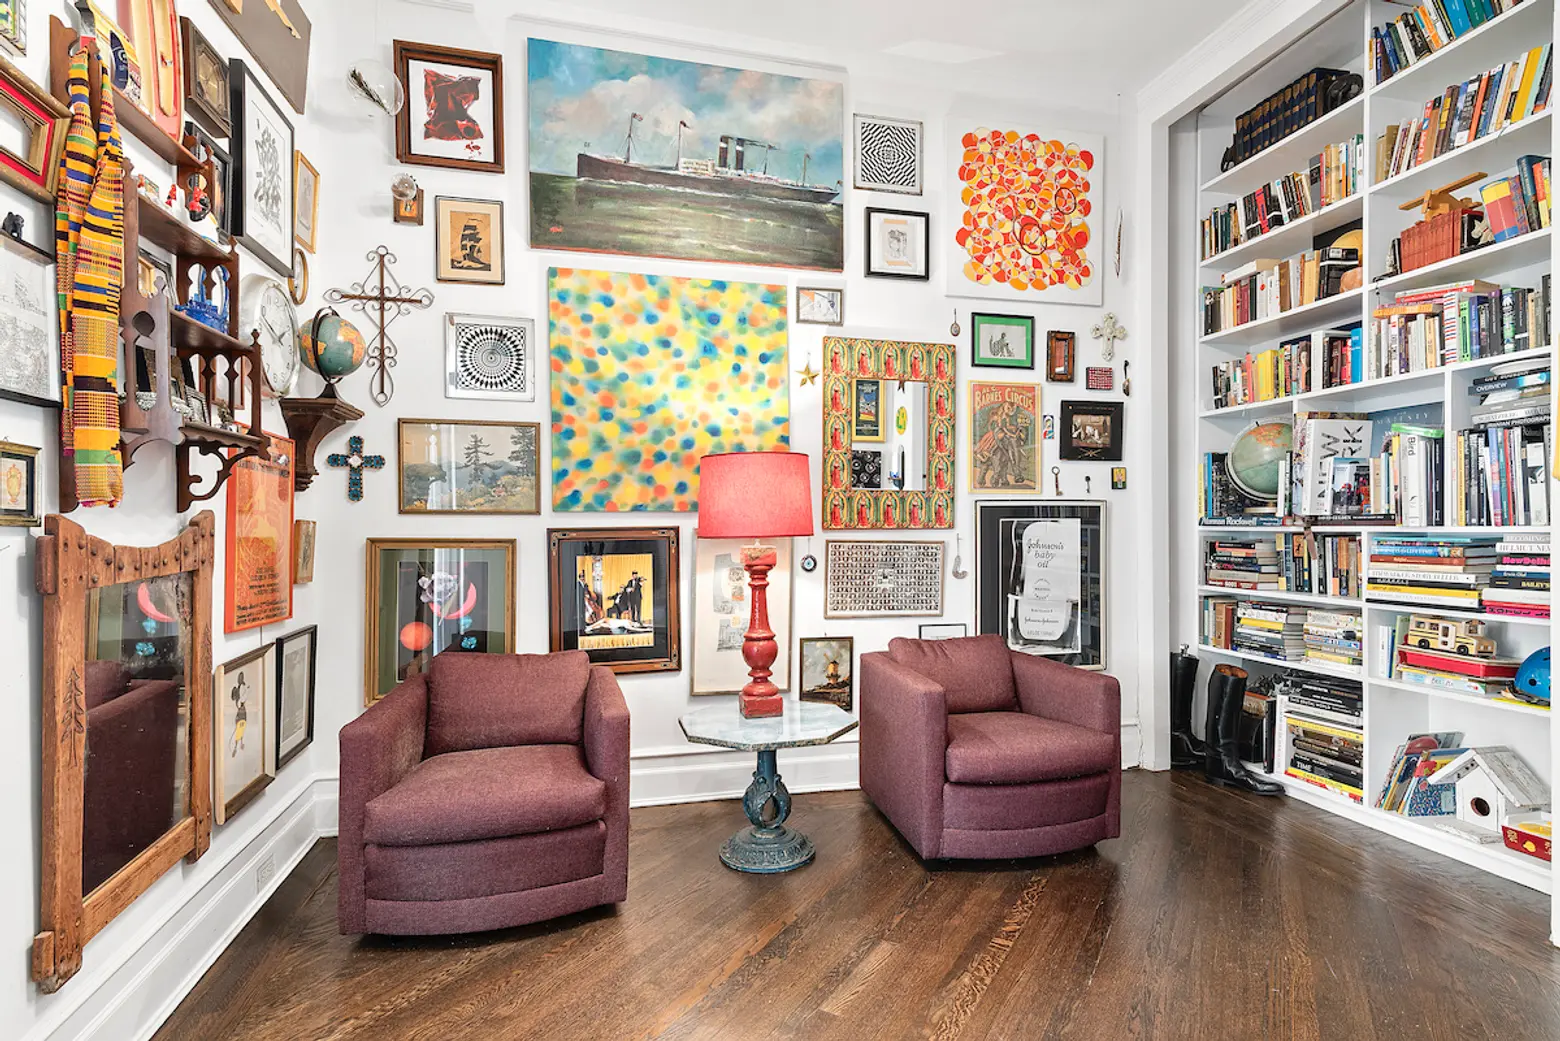 996 Saint Johns Place, crown heights, cool listings, townhouses